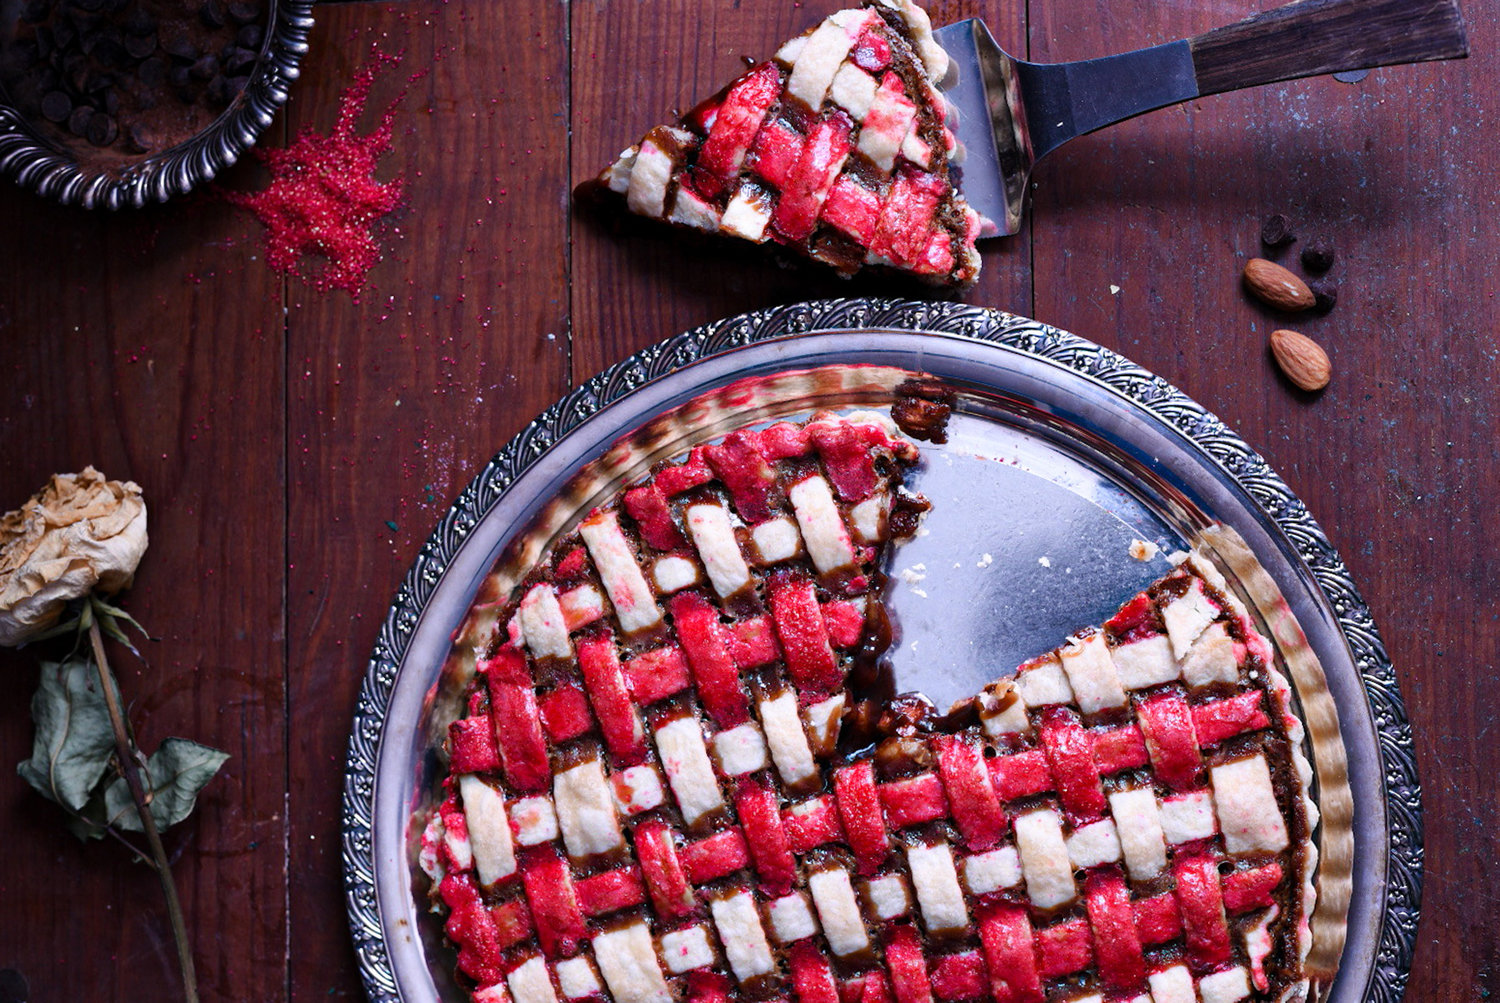 Impress guests with a decadant holiday pie